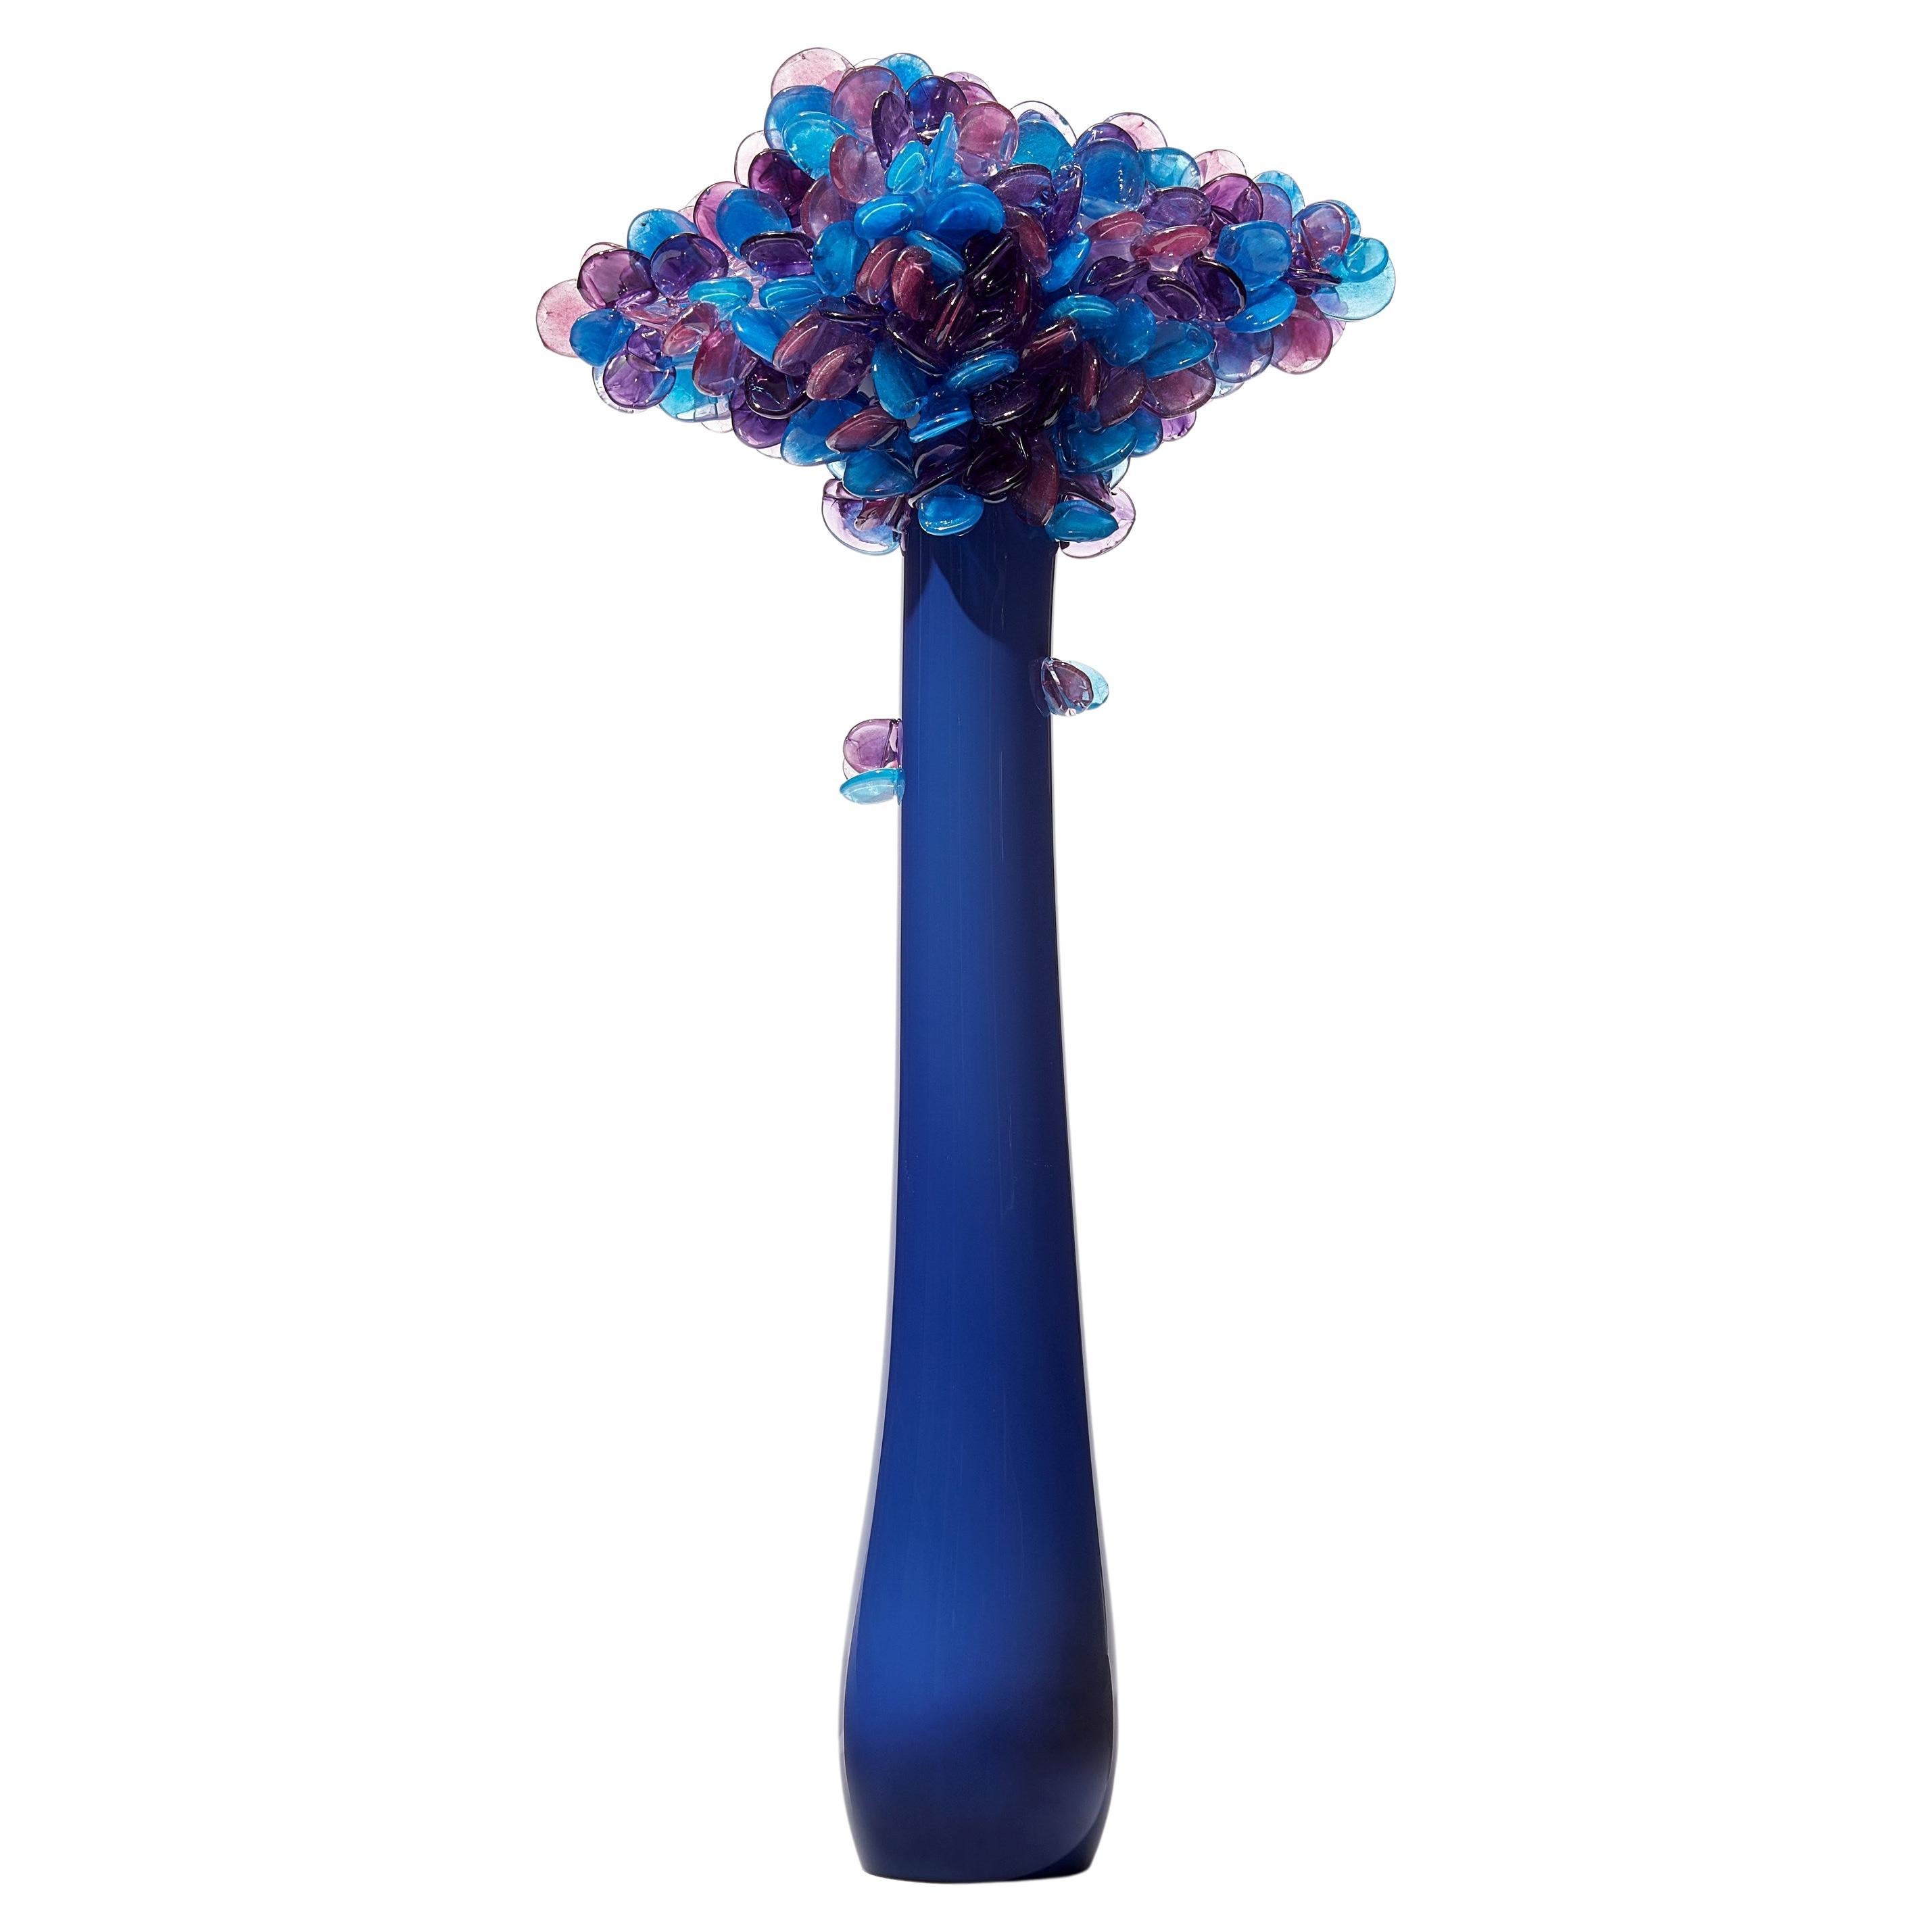 Enchanted Dawn in Iron Blue III, tree inspired glass sculpture by Louis Thompson